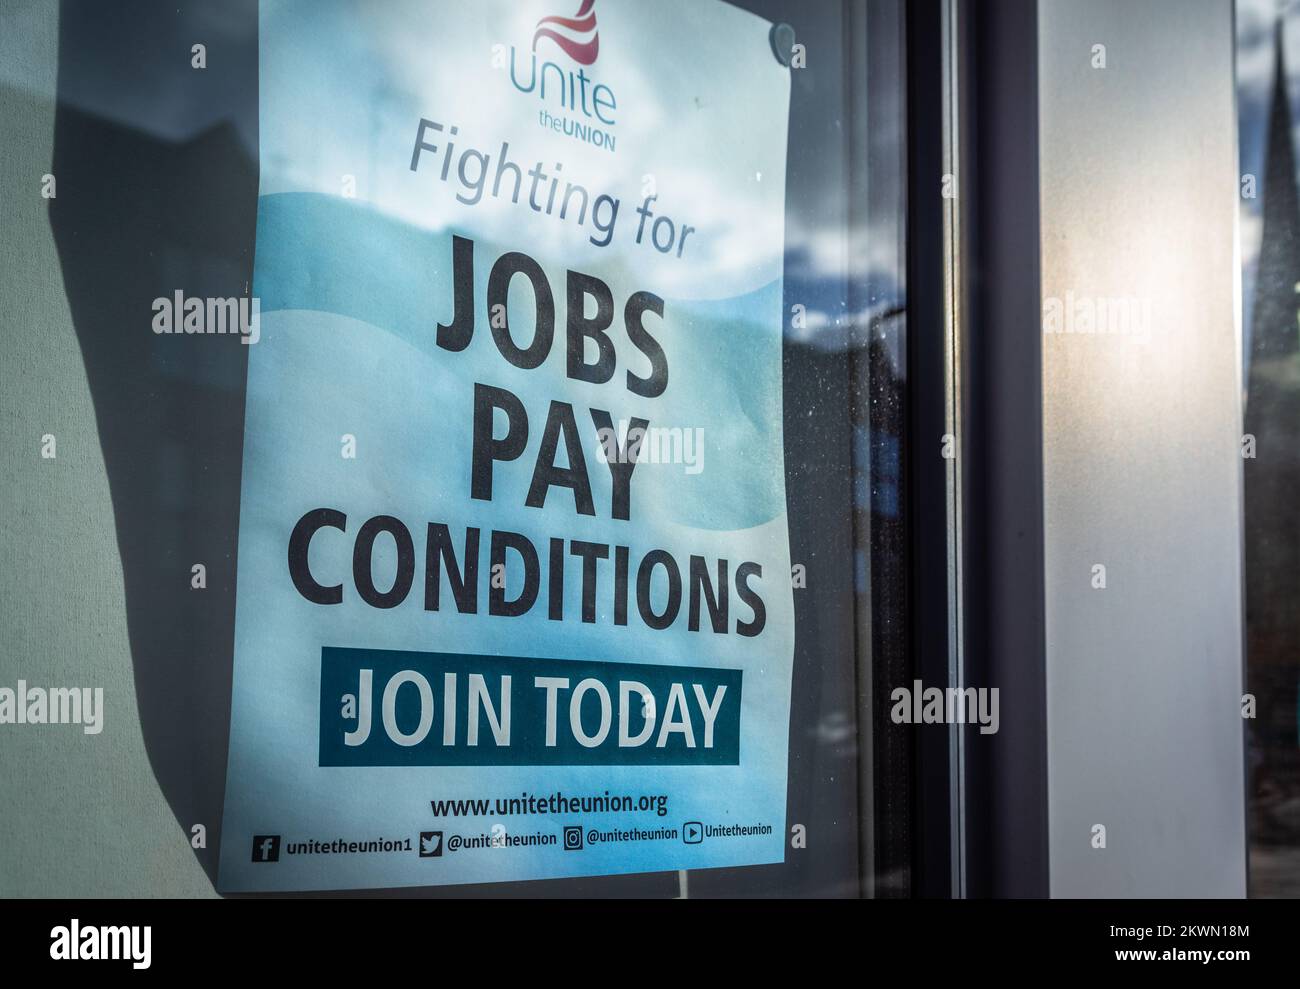 'Unite the Union fighting for jobs pay conditions - join today' poster at a Unite branch in Southern England, Hampshire, UK Stock Photo